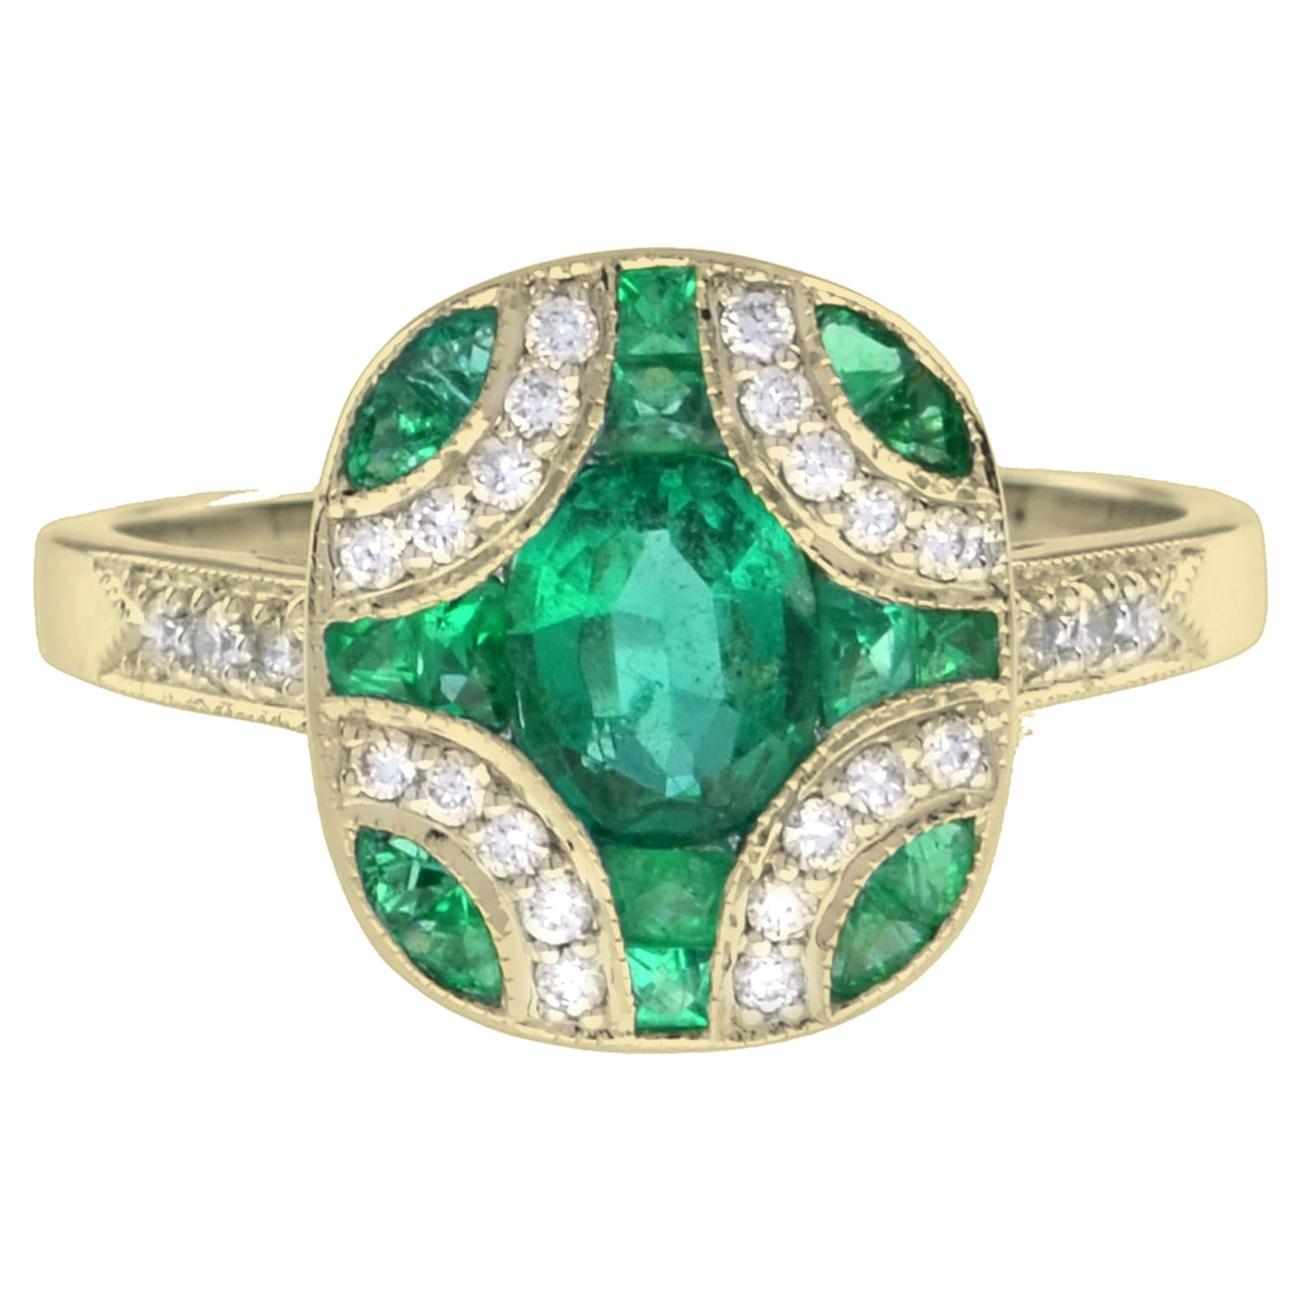 Art Deco Style Oval Emerald with Diamond Ring in 18K Yellow Gold